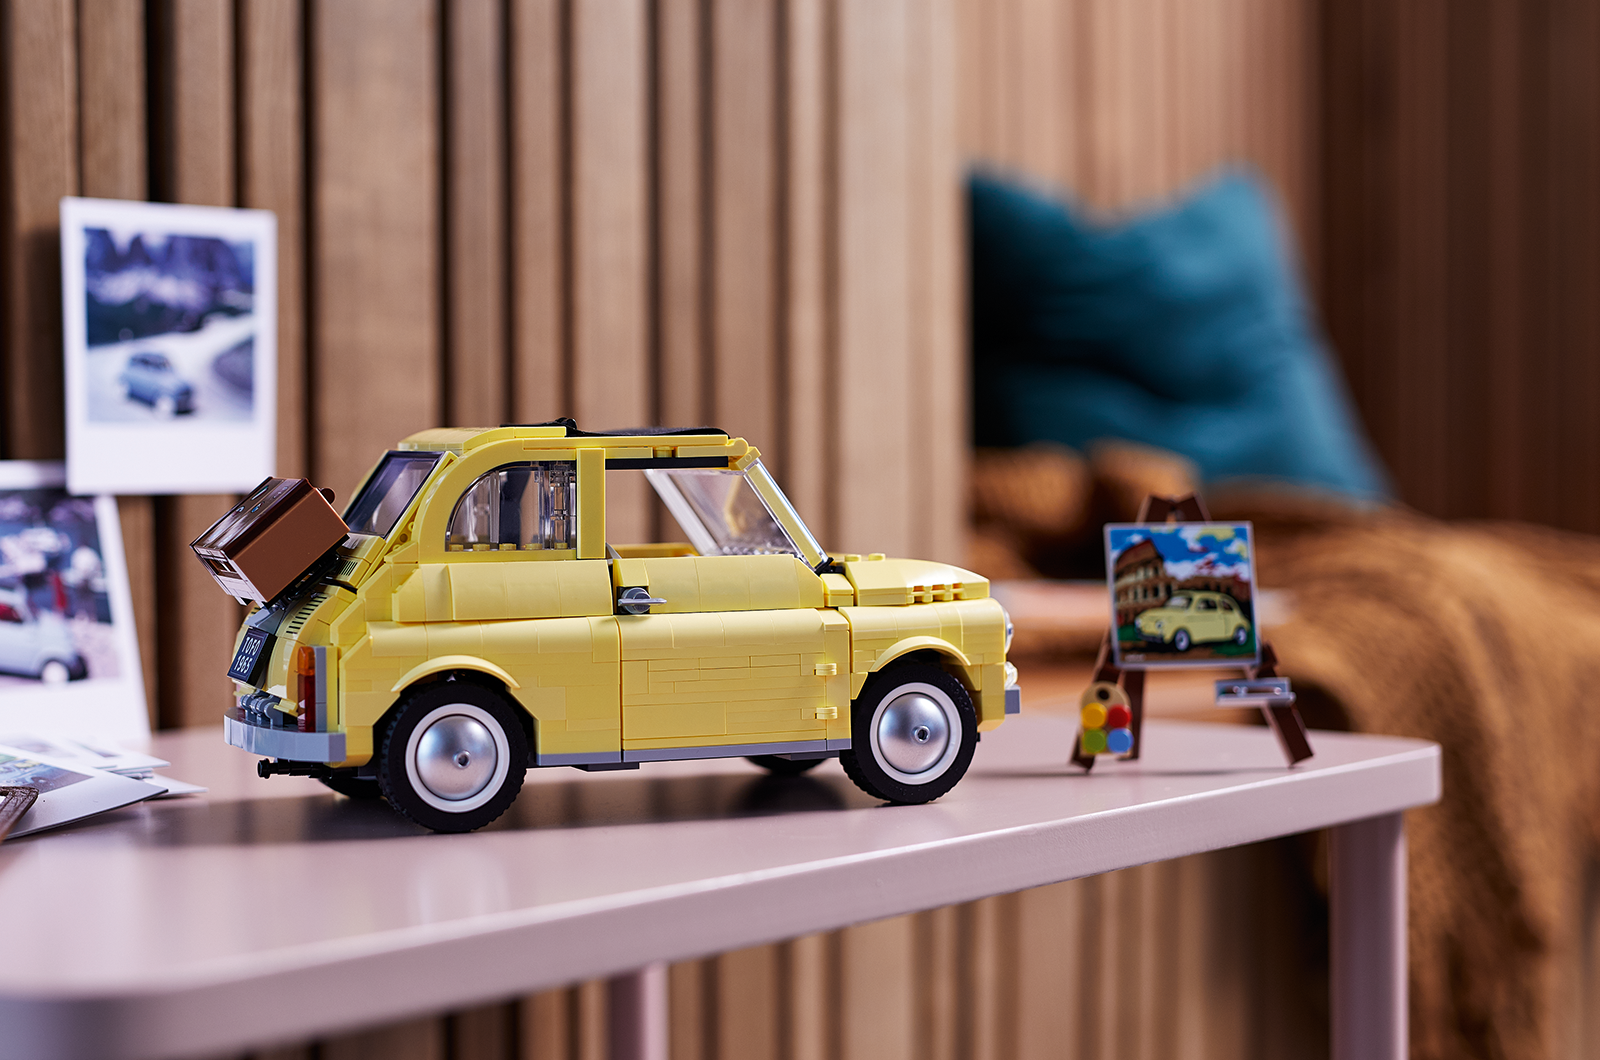 Classic & Sports Car – Lego’s done it again – this time with a classic Fiat 500